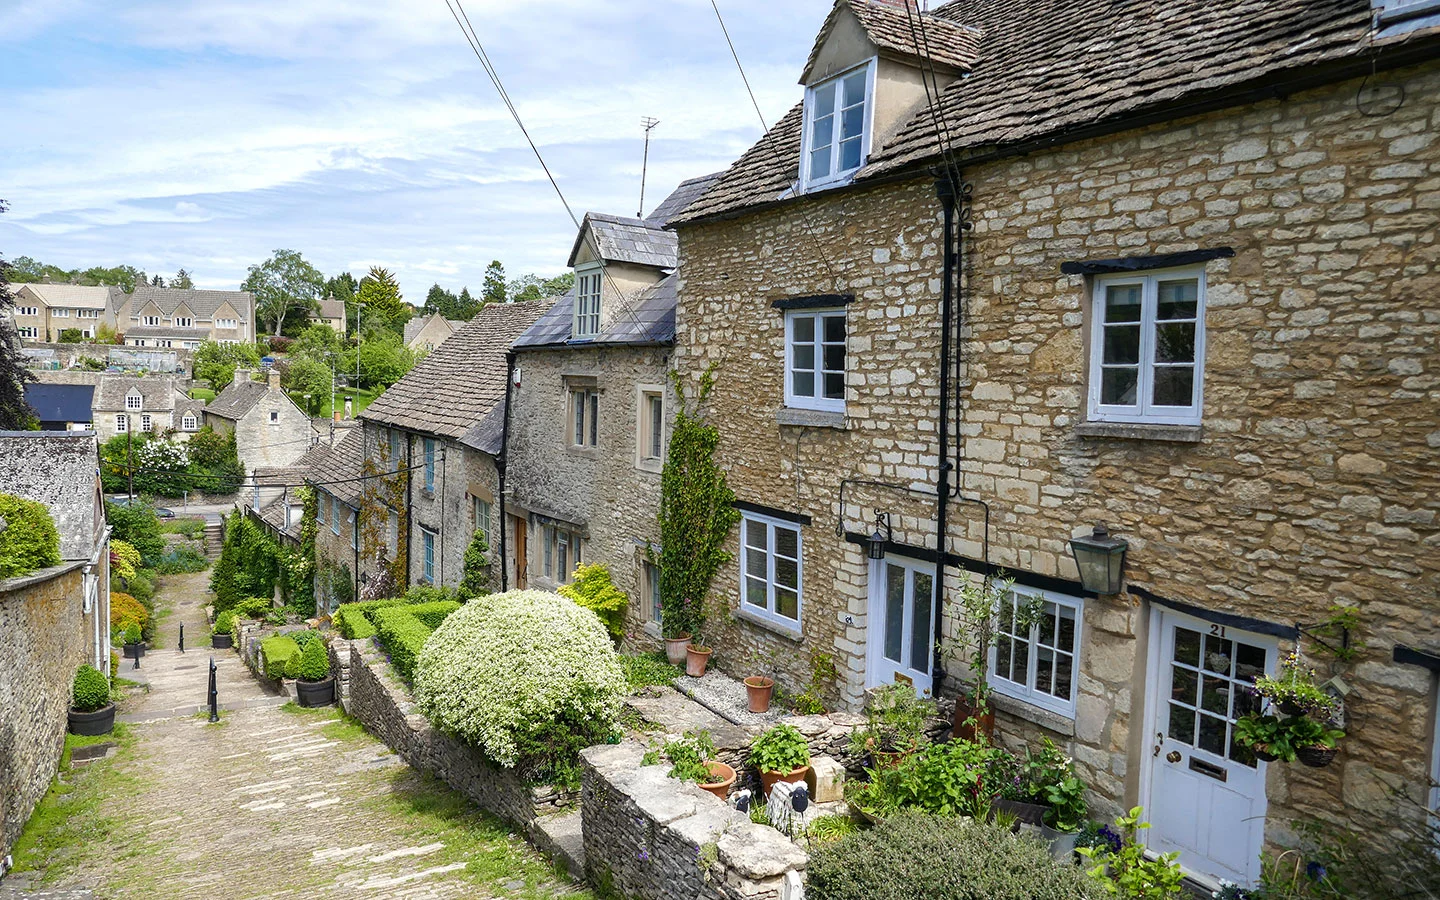 Wool merchants' houses along the Chipping Steps, Tetbury